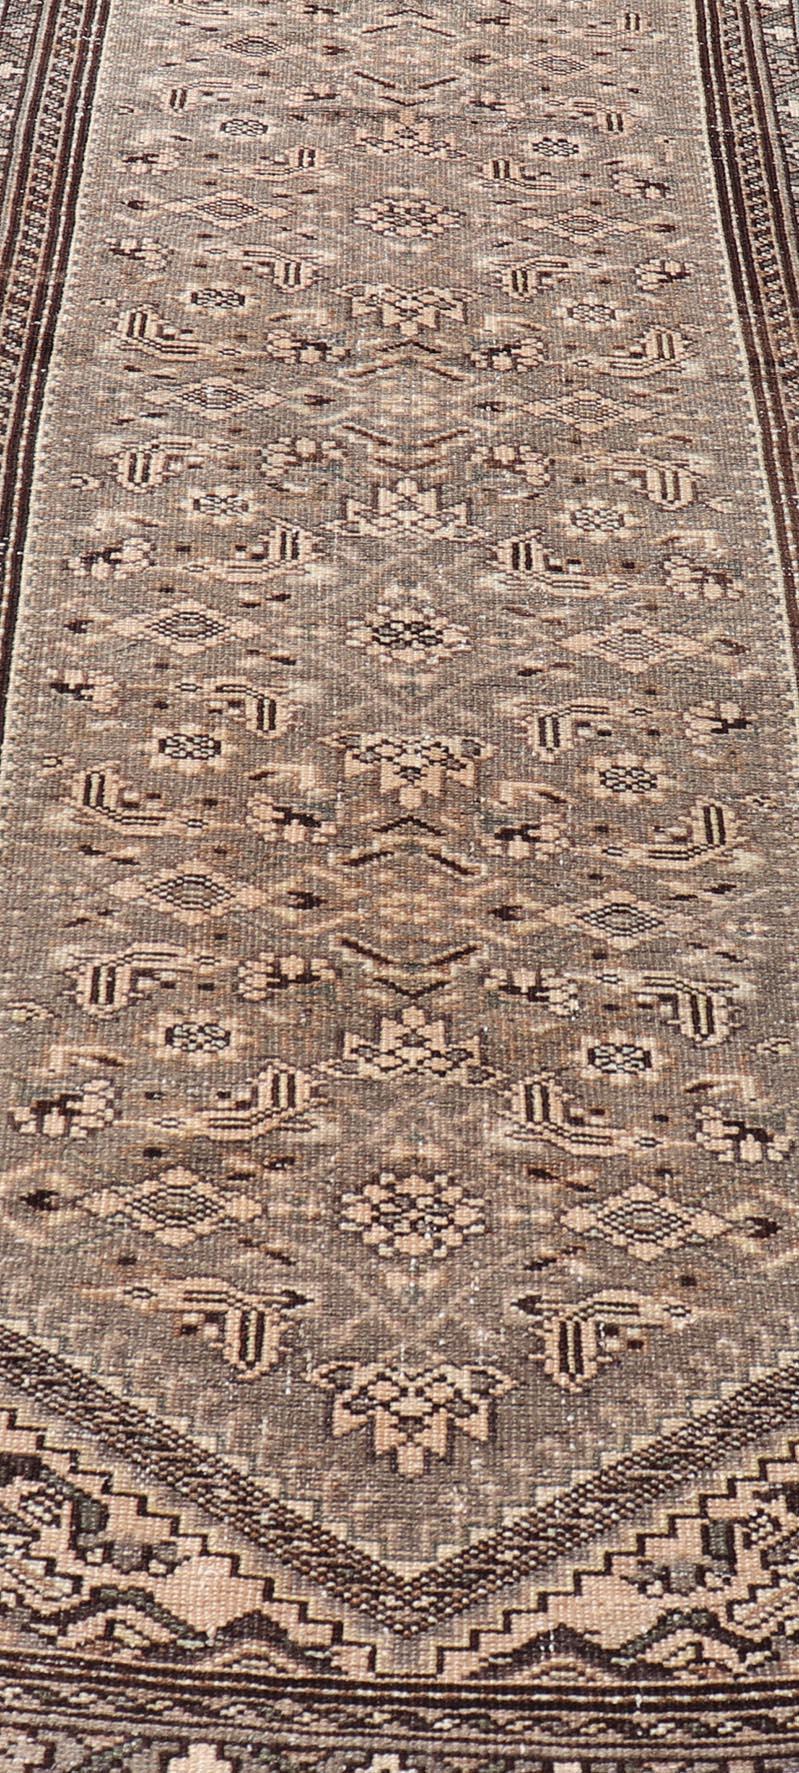 Wool Vintage Persian Hamadan Runner in Warm Tones of Grey, Brown and Taupe  For Sale